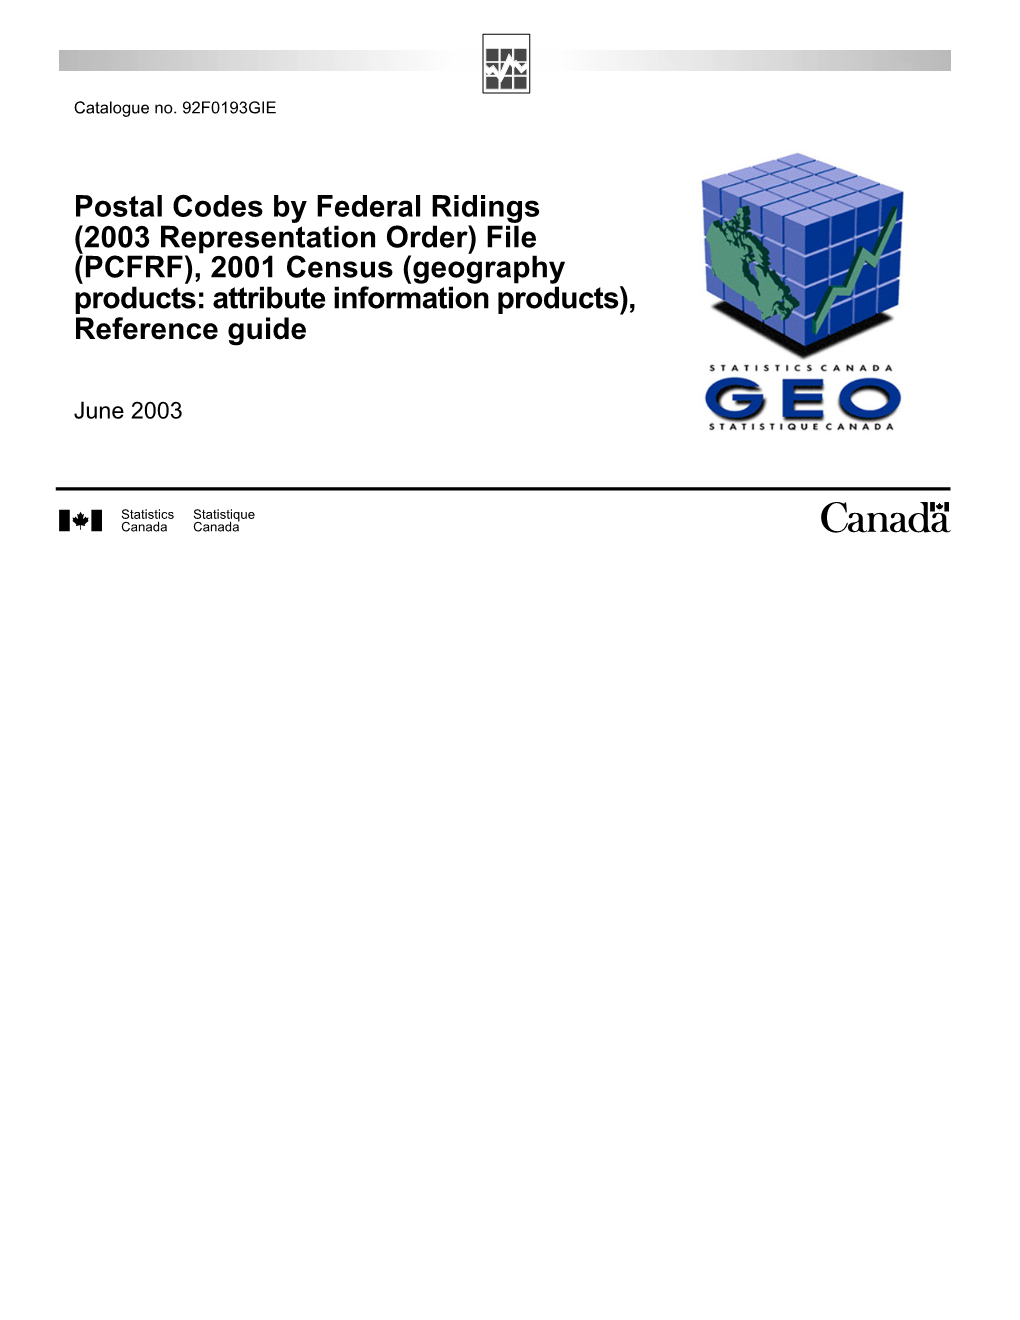 Postal Codes by Federal Ridings (2003 Representation Order) File (PCFRF), 2001 Census (Geography Products: Attribute Information Products), Reference Guide